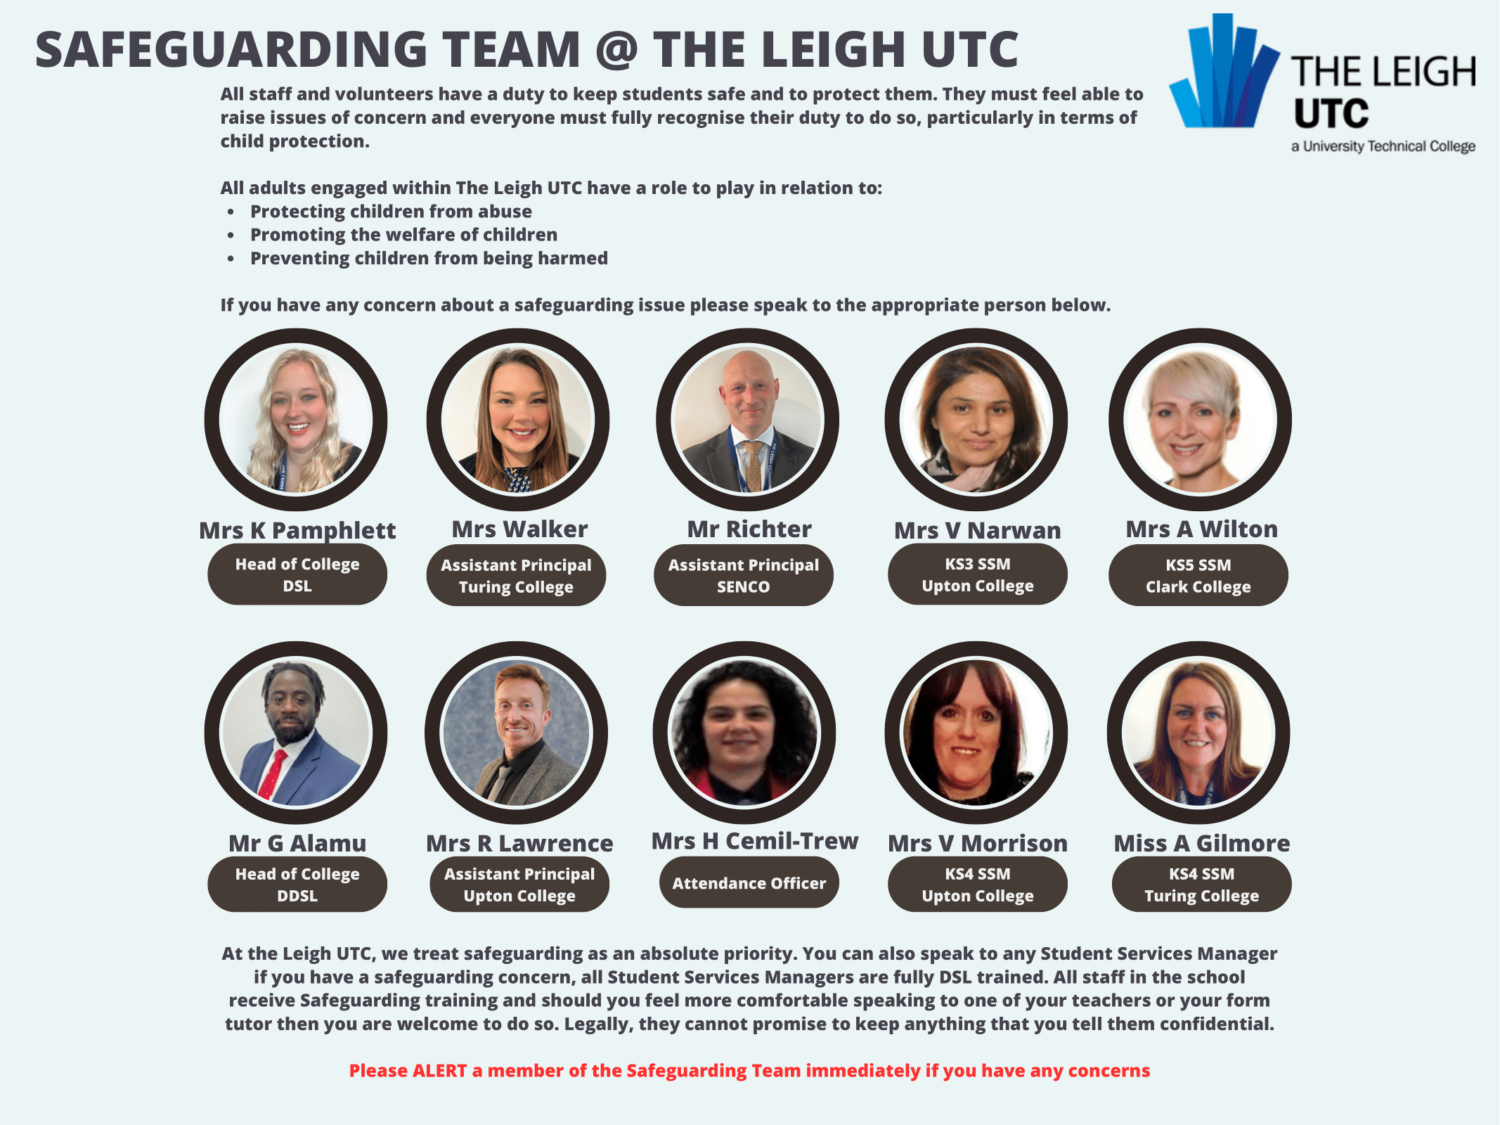 The Leigh UTC Safeguarding Team poster with additional overview information about safeguarding